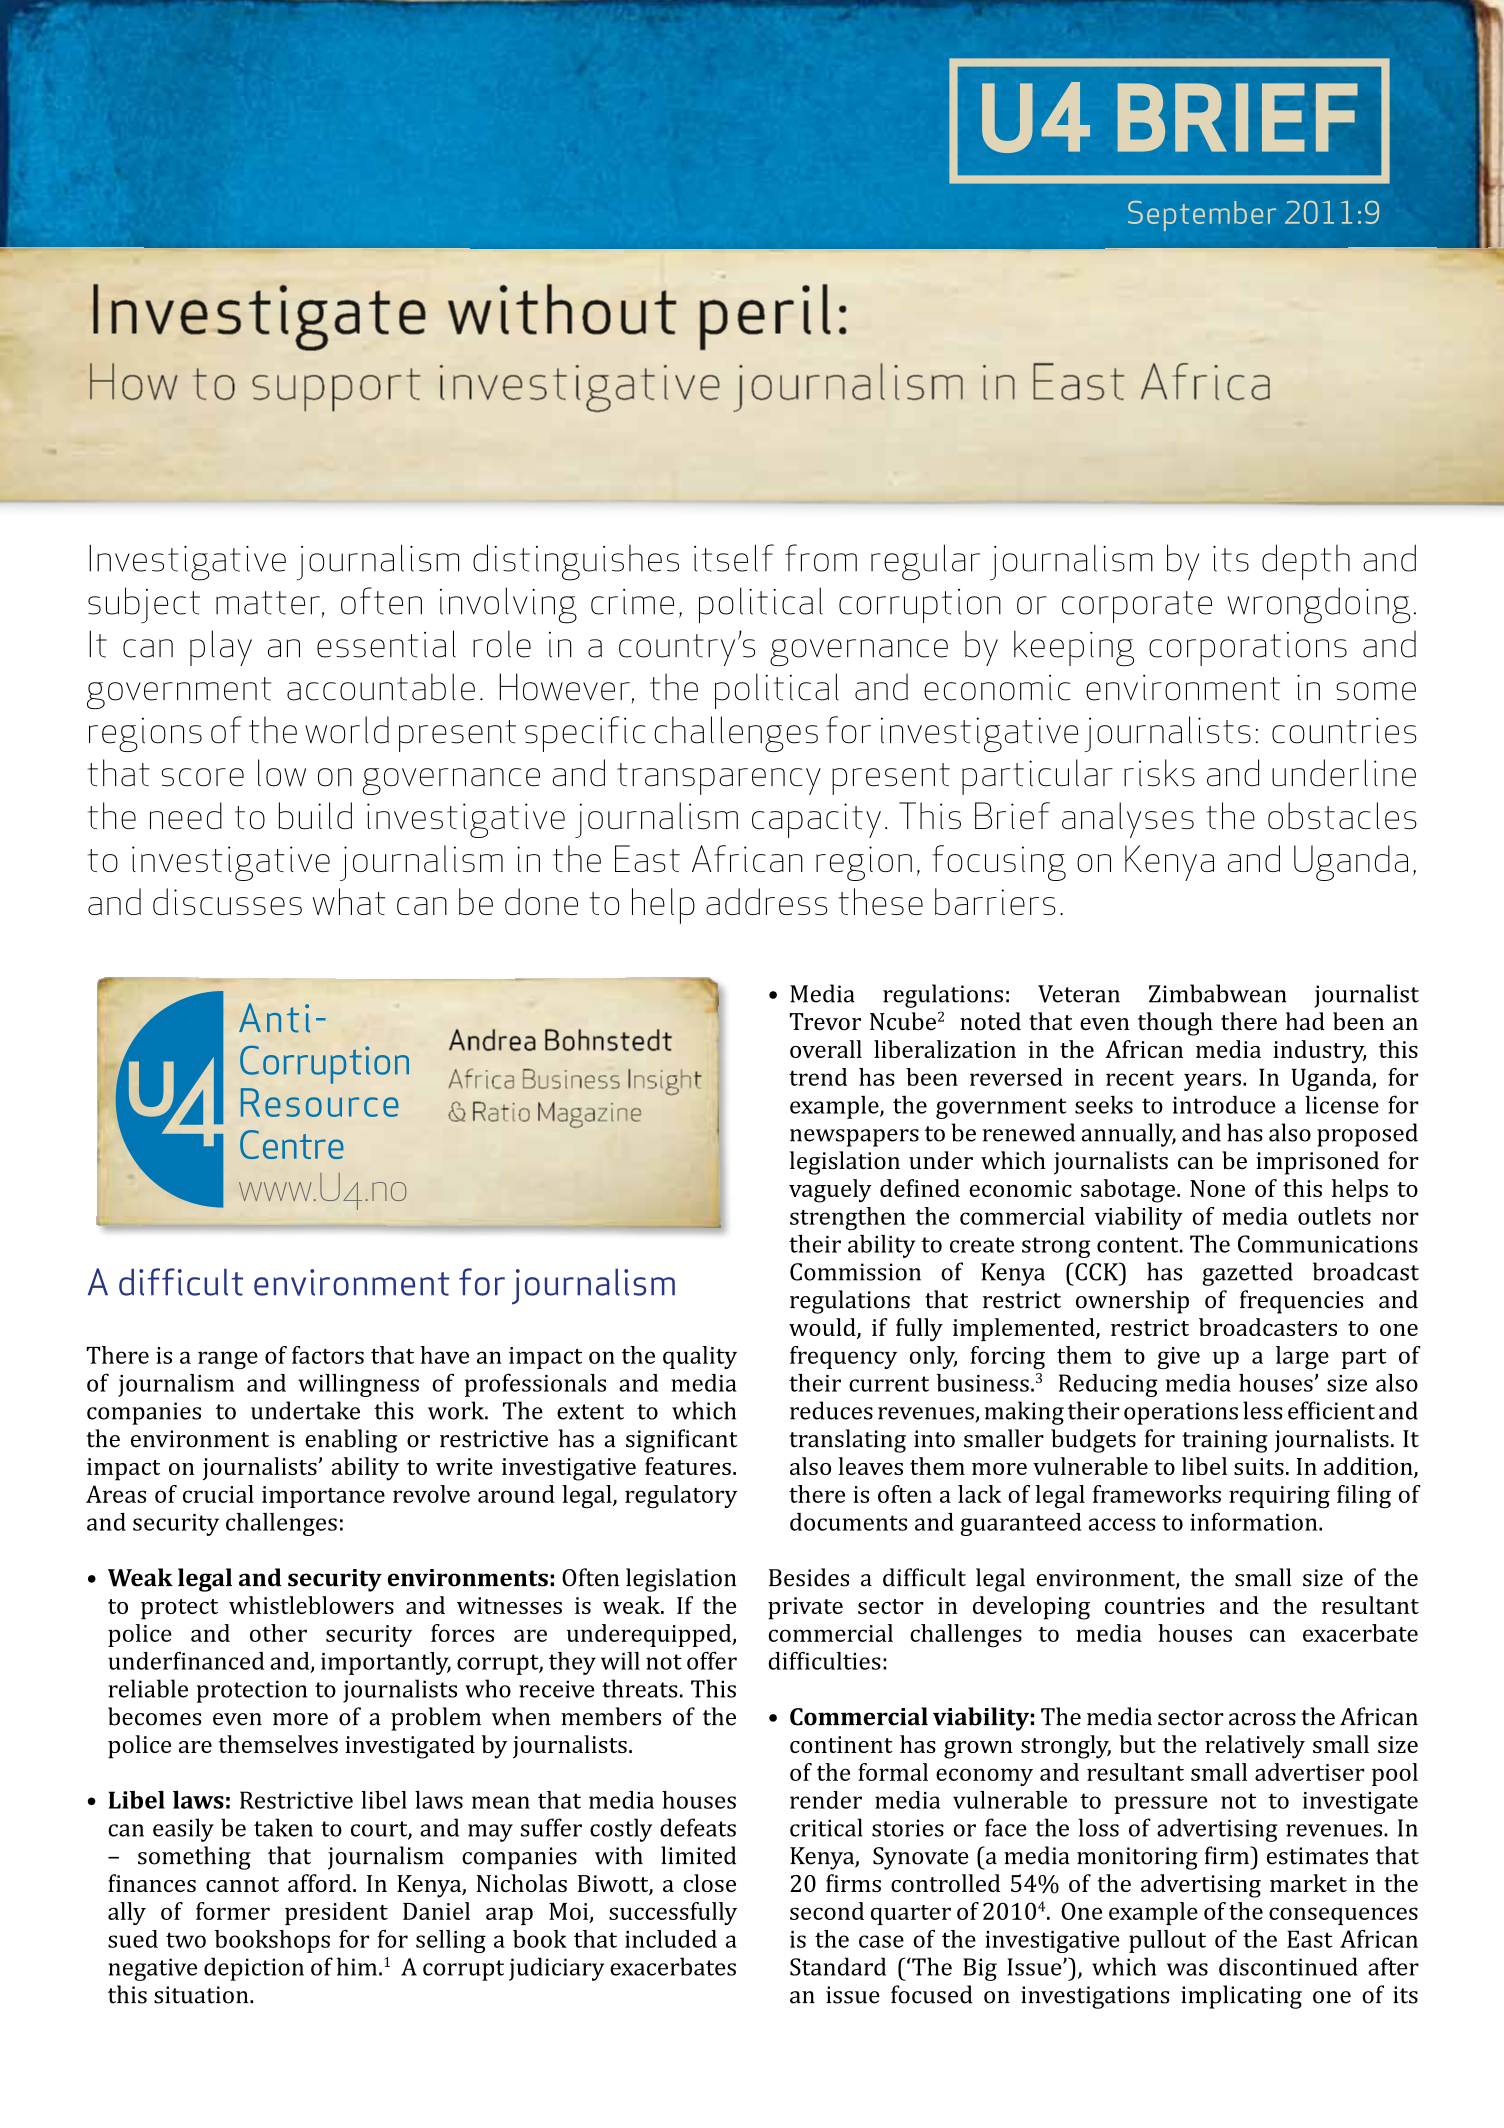 Investigate without peril: How to support investigative journalism in East Africa